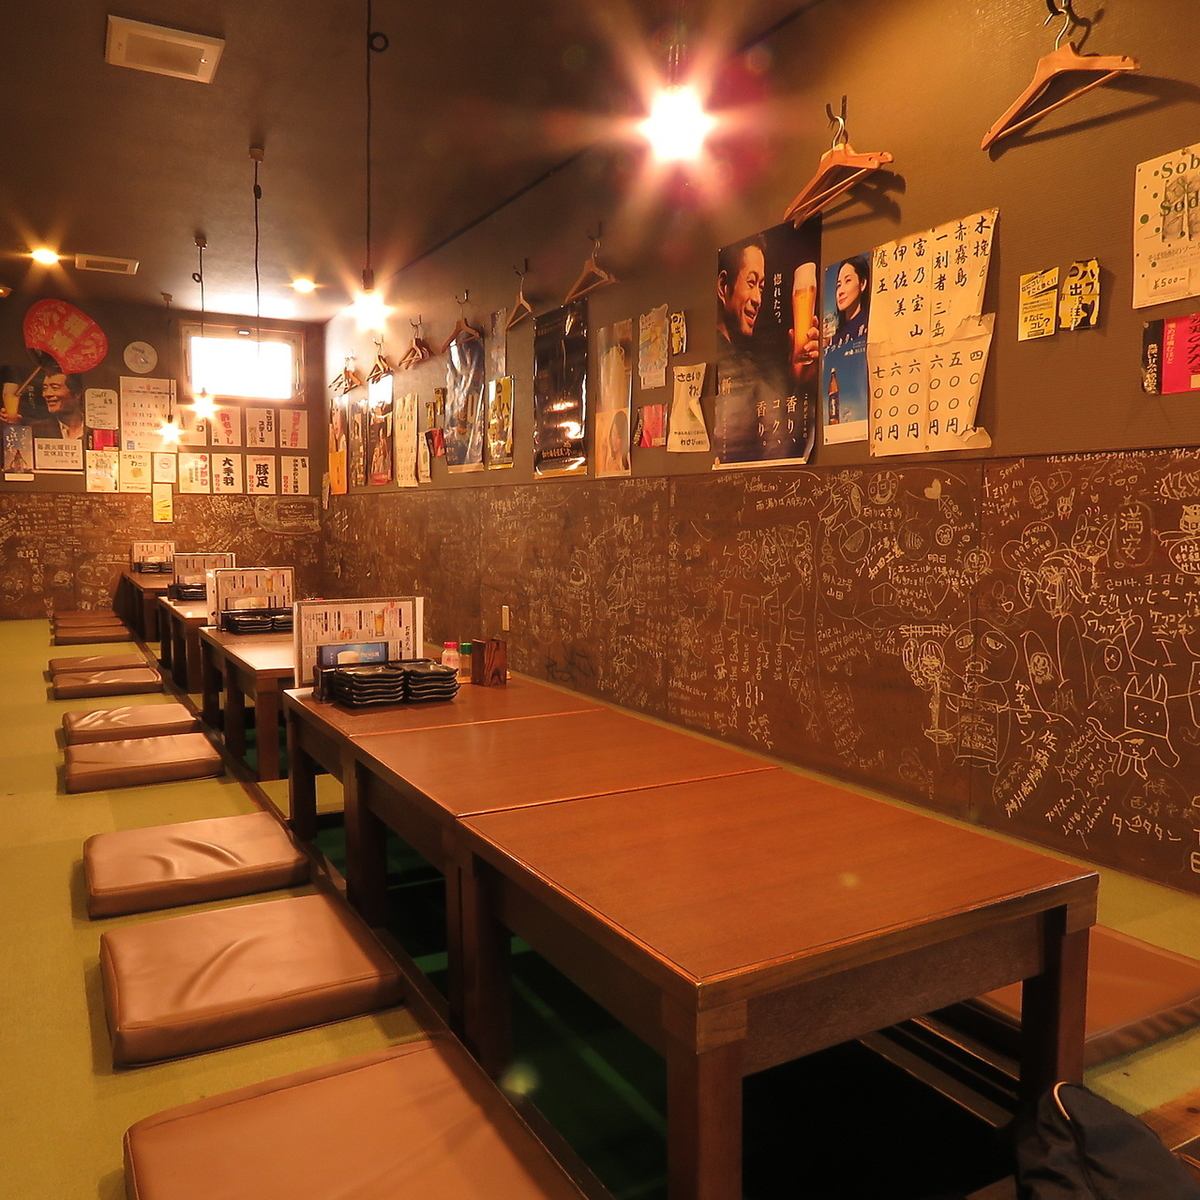 You can also have a party at the sunken kotatsu seats!